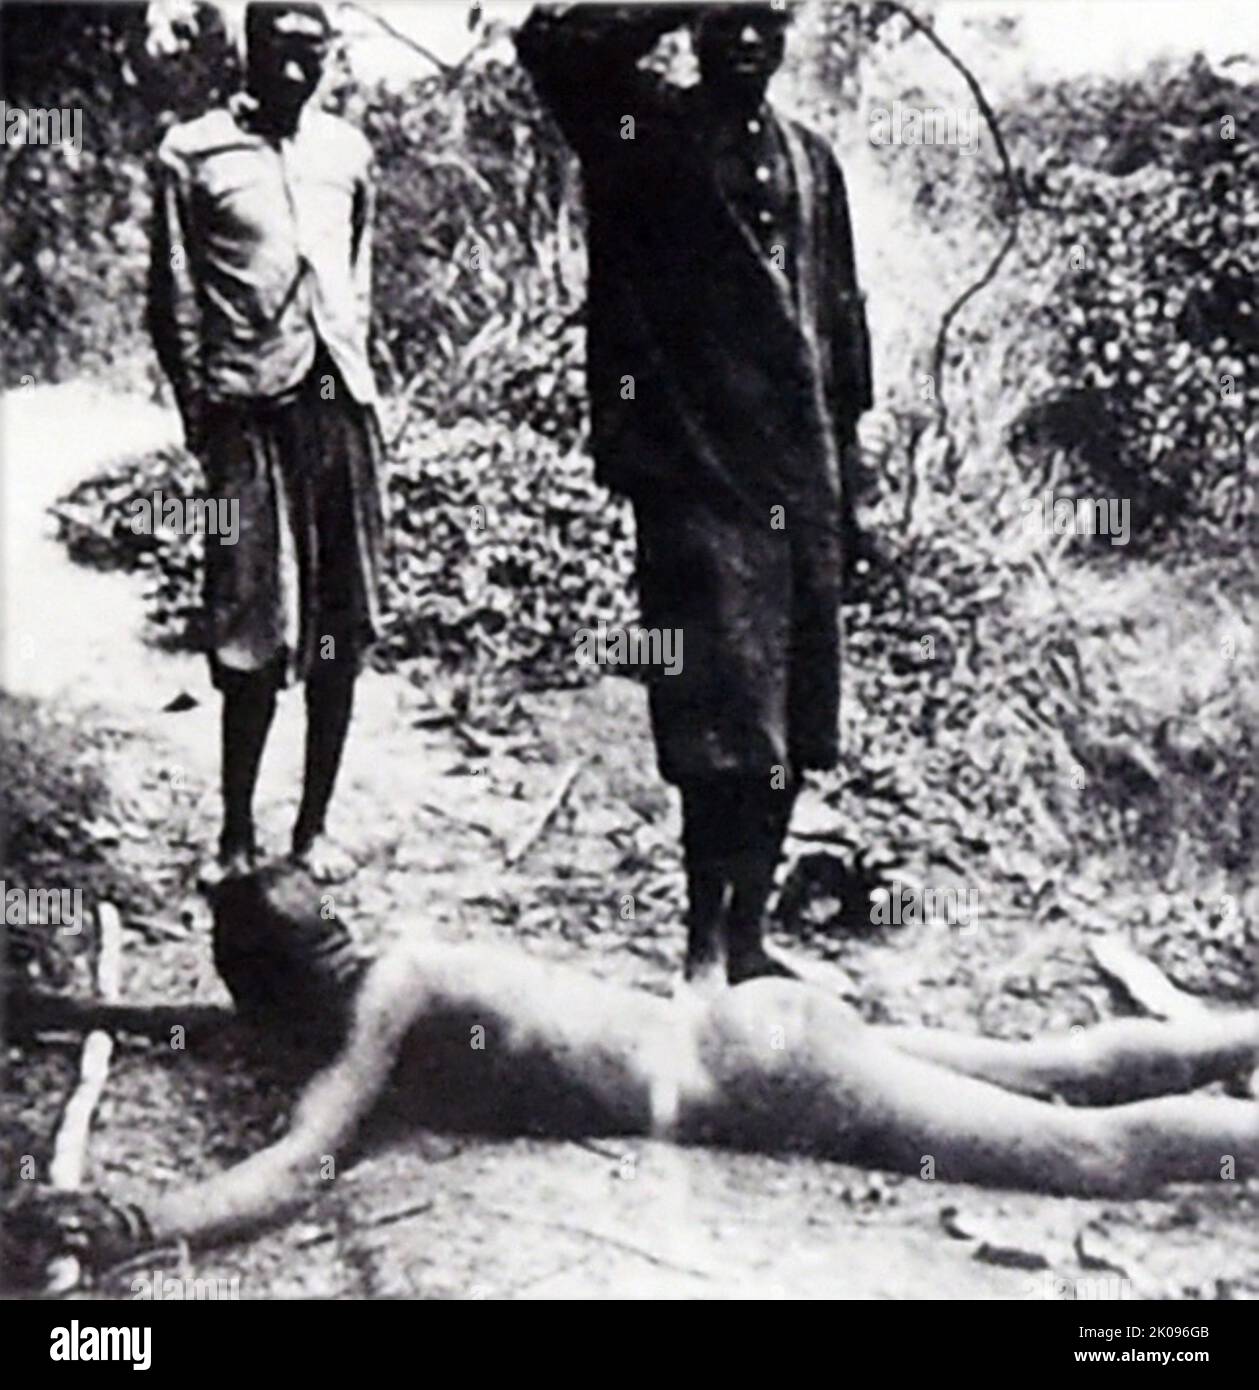 King Leopold II of Belgium's administration of the Congo Free State was characterised by atrocities, including torture and murder, resulting from notorious systematic brutality. The hands of men, women, and children were amputated when the quota of rubber was not met and millions of the Congolese people died. Stock Photo